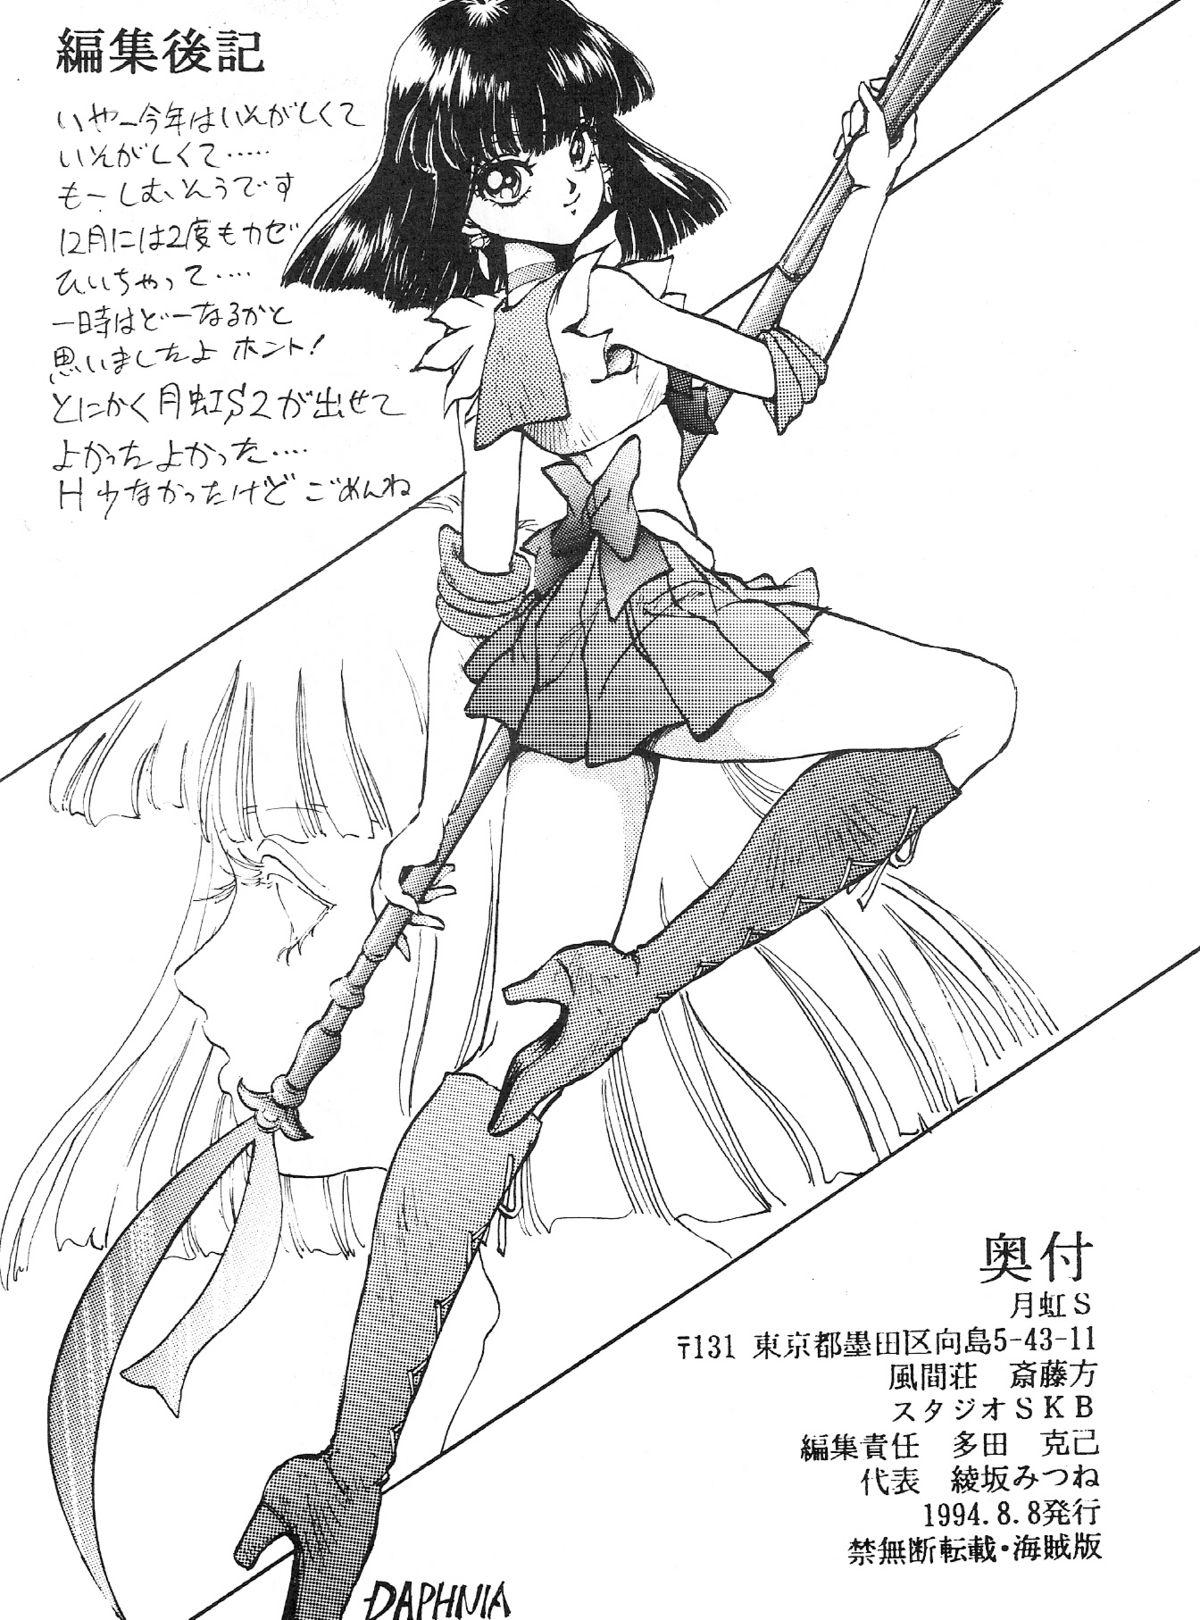 Rica Gekkou SII - Sailor moon Special Locations - Page 51